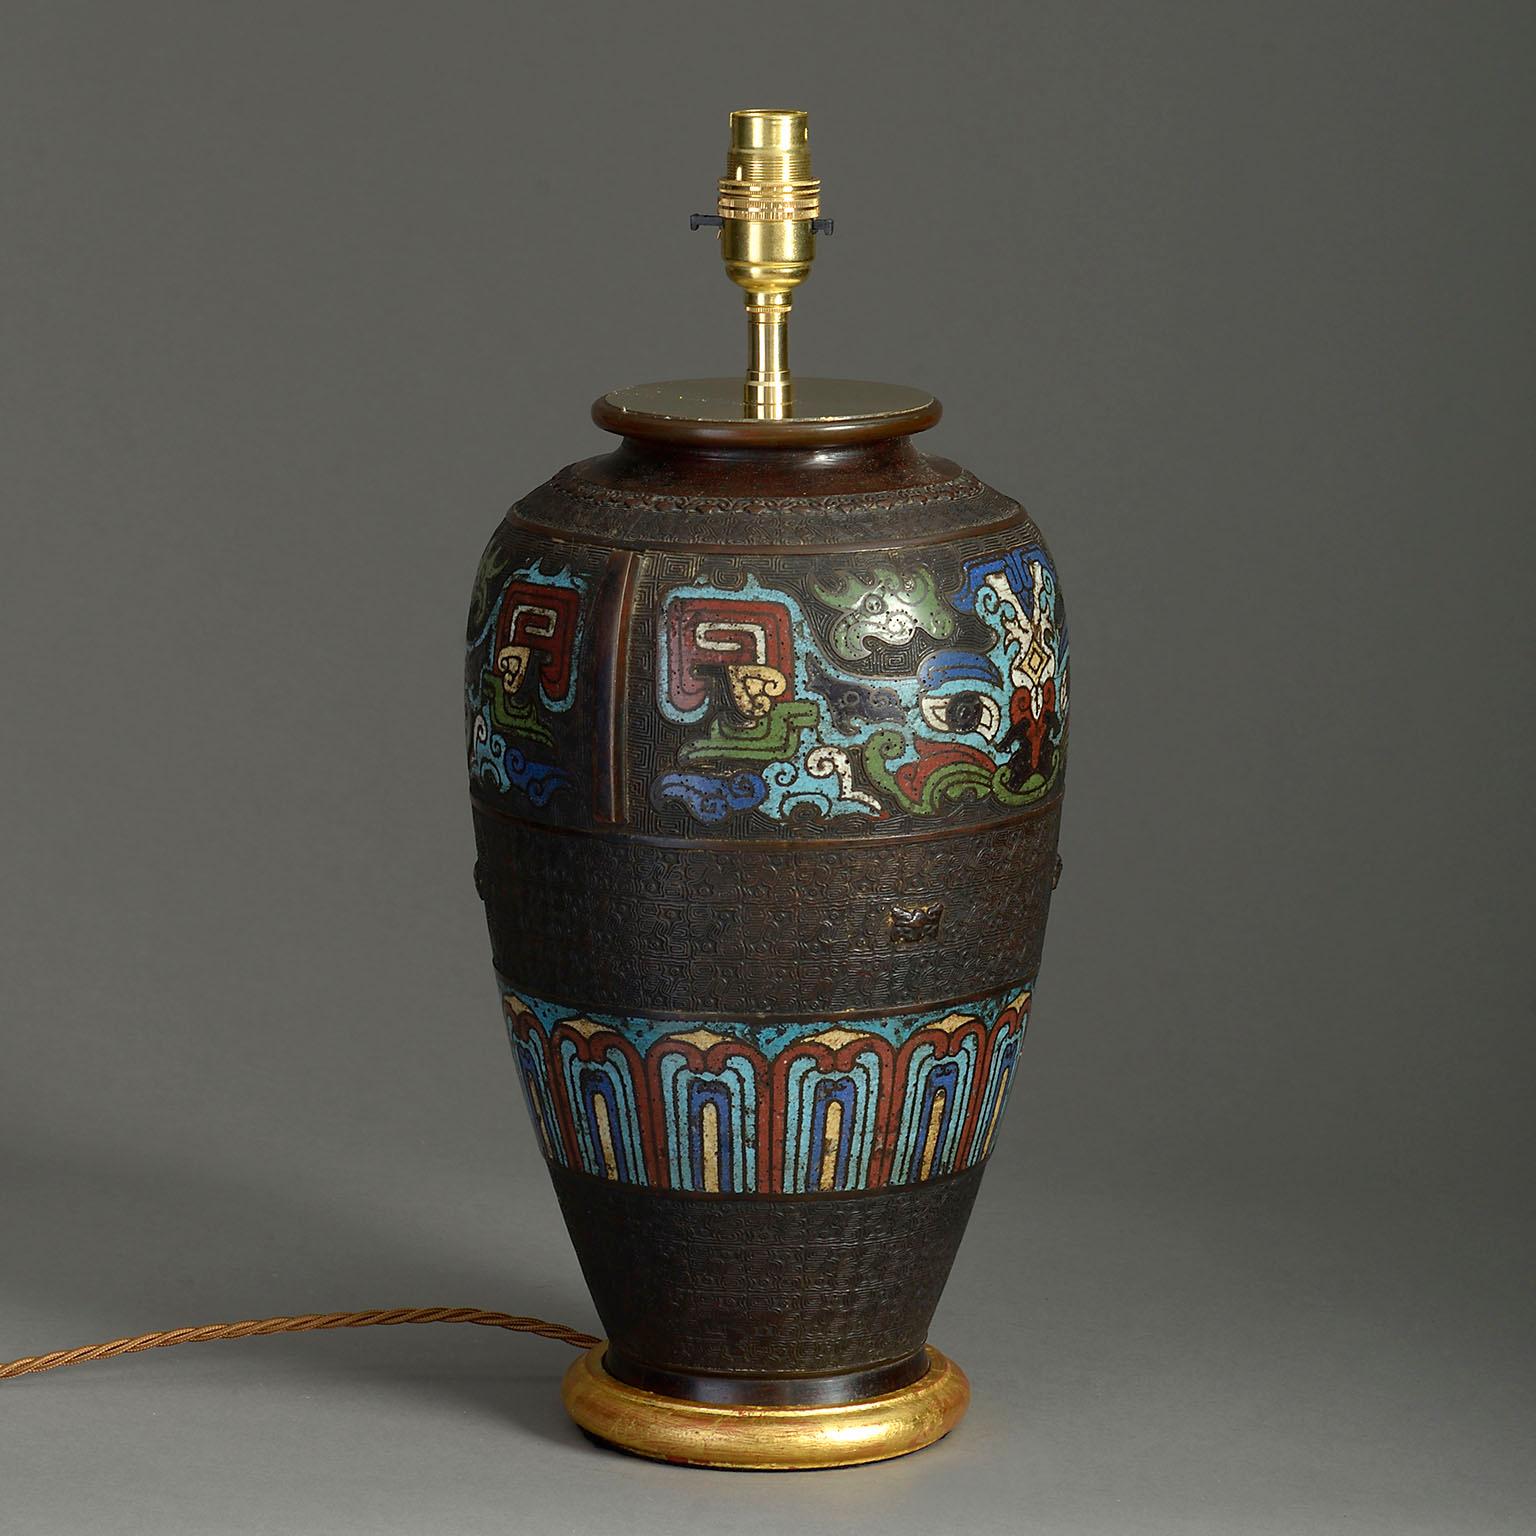 A late 19th century bronze vase, with finely cast decoration and enamelled inlay, mounted as a lamp with hand-turned water gilded base.

Dimensions refer to bronze vase and base only.

Shade not included.